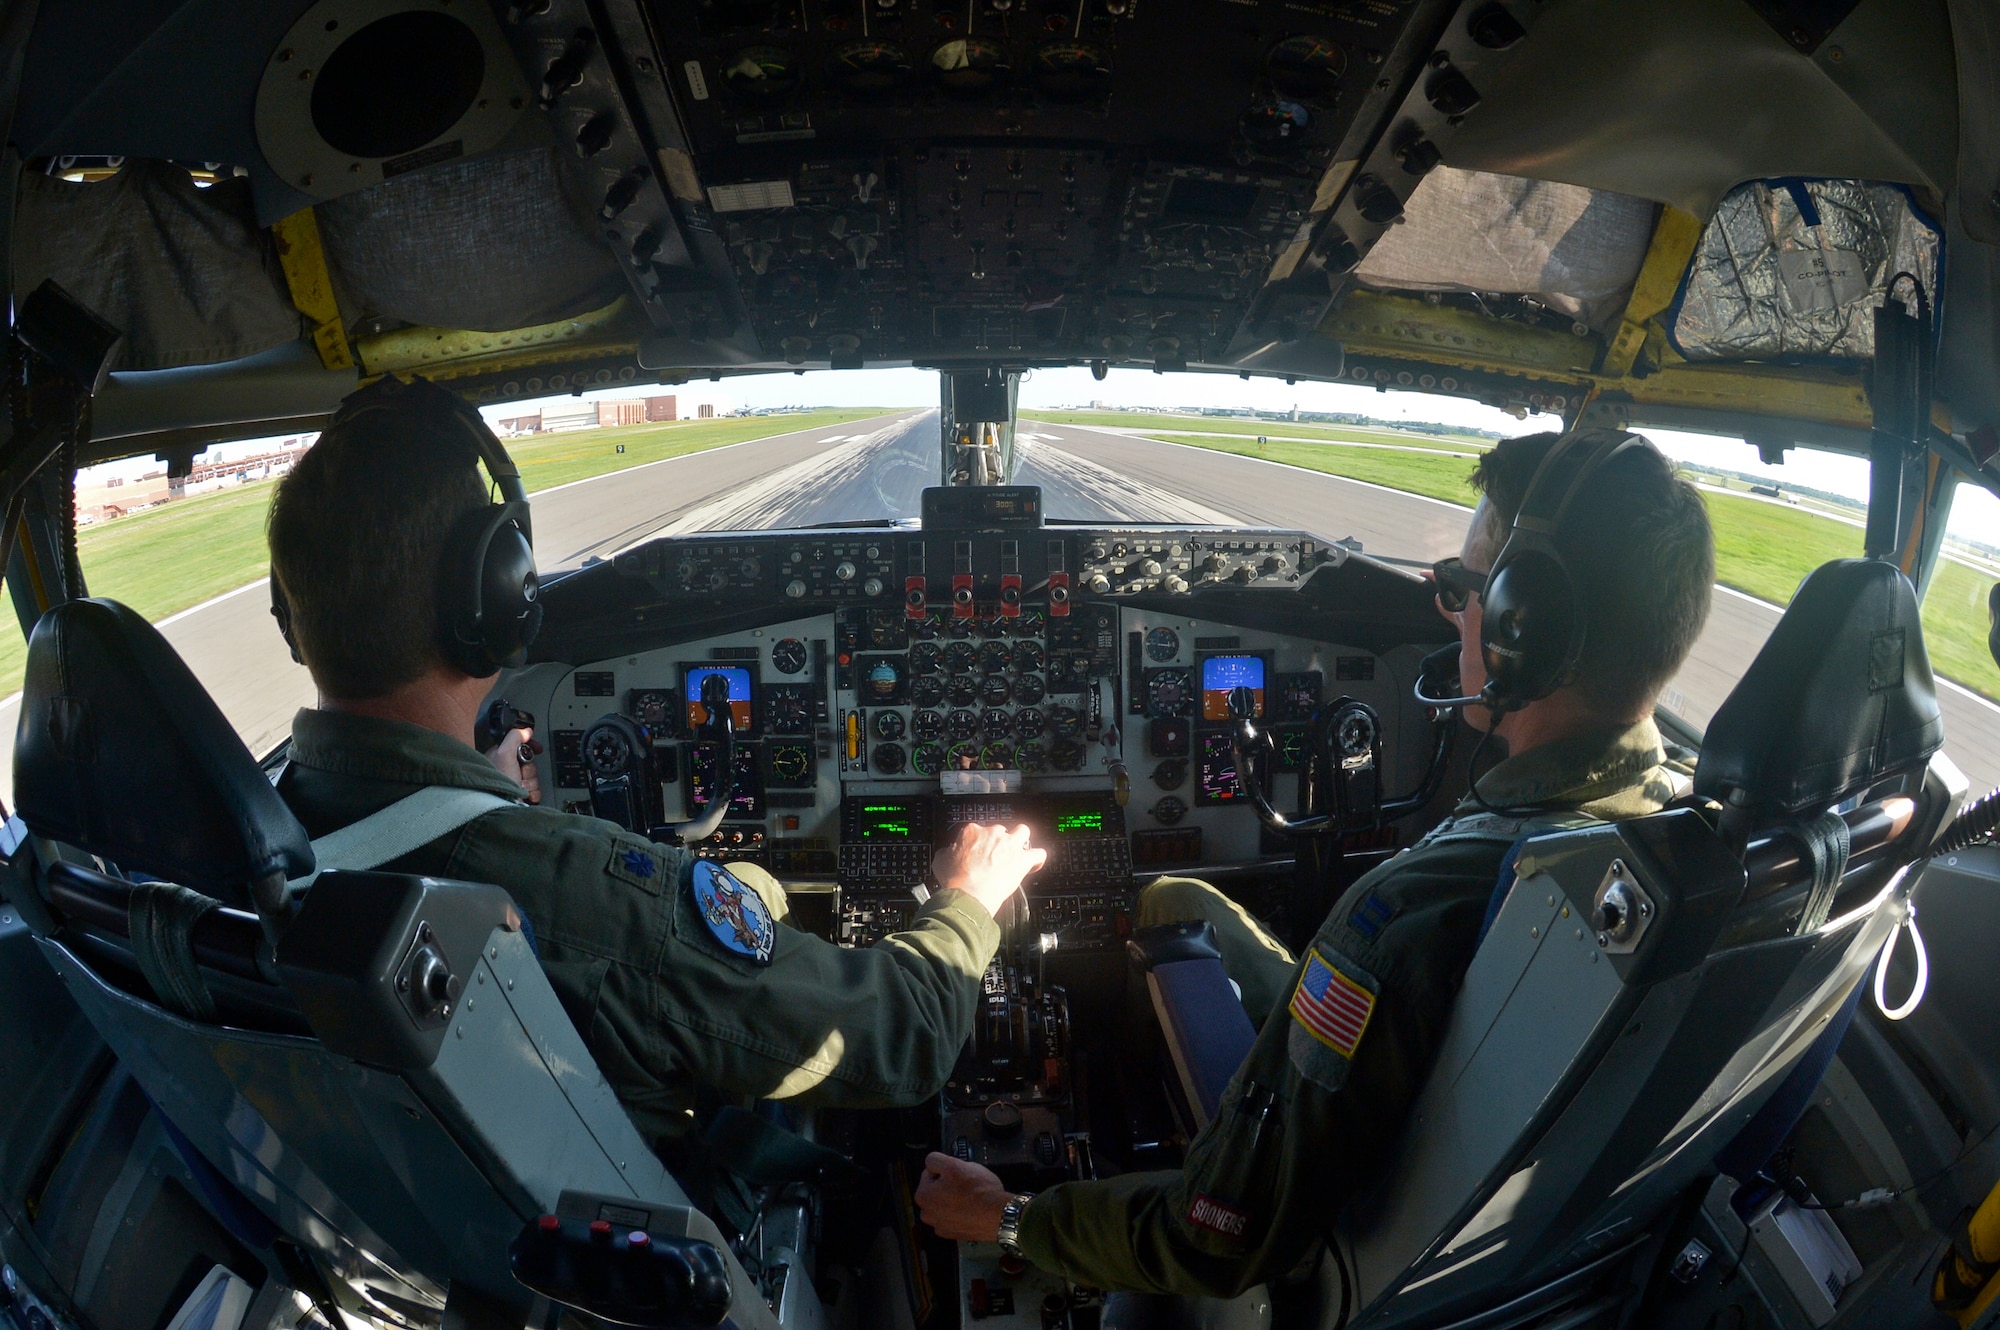 U.S. Air Force Lt. Col. Mark Hole, pilot, and Captain Thomas Bryceland, co-pilot, 185th Air Refueling Squadron, prepare for takeoff in the KC-135 Stratotanker for the last time during the last training mission of the 185 ARS on Tinker Air Force base, June 30, 2015 at Tinker Air Force base, Okla. The 185 ARS will be transitioning to Air Force Special Operations Command. (U.S. Air Force photo by Tech Sgt. Caroline Essex/Released)